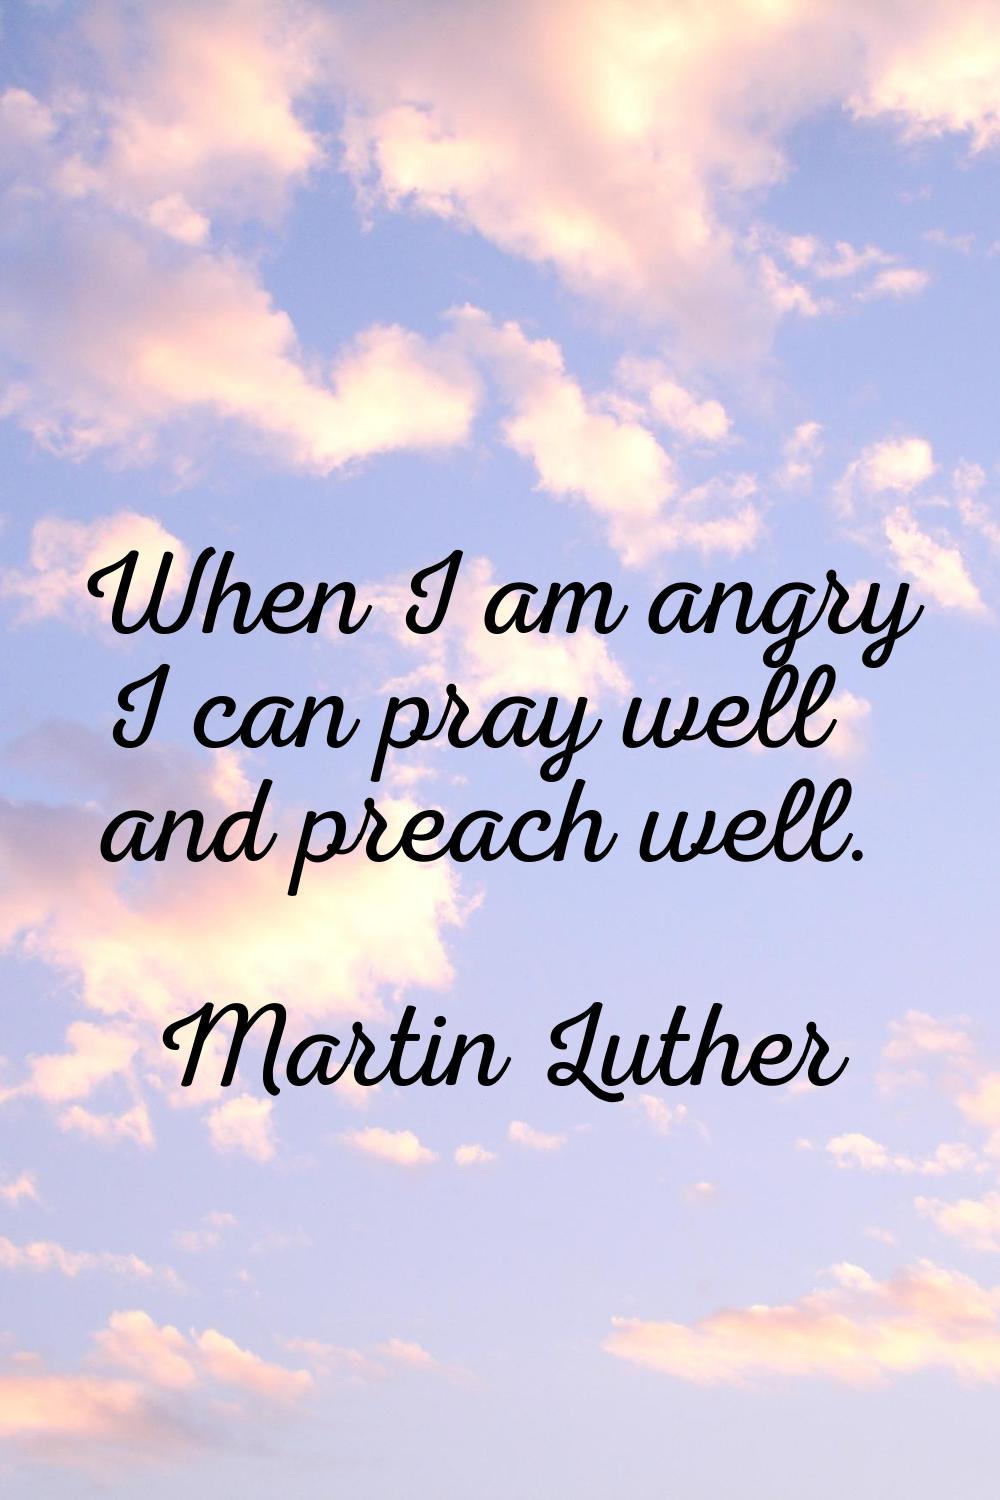 When I am angry I can pray well and preach well.